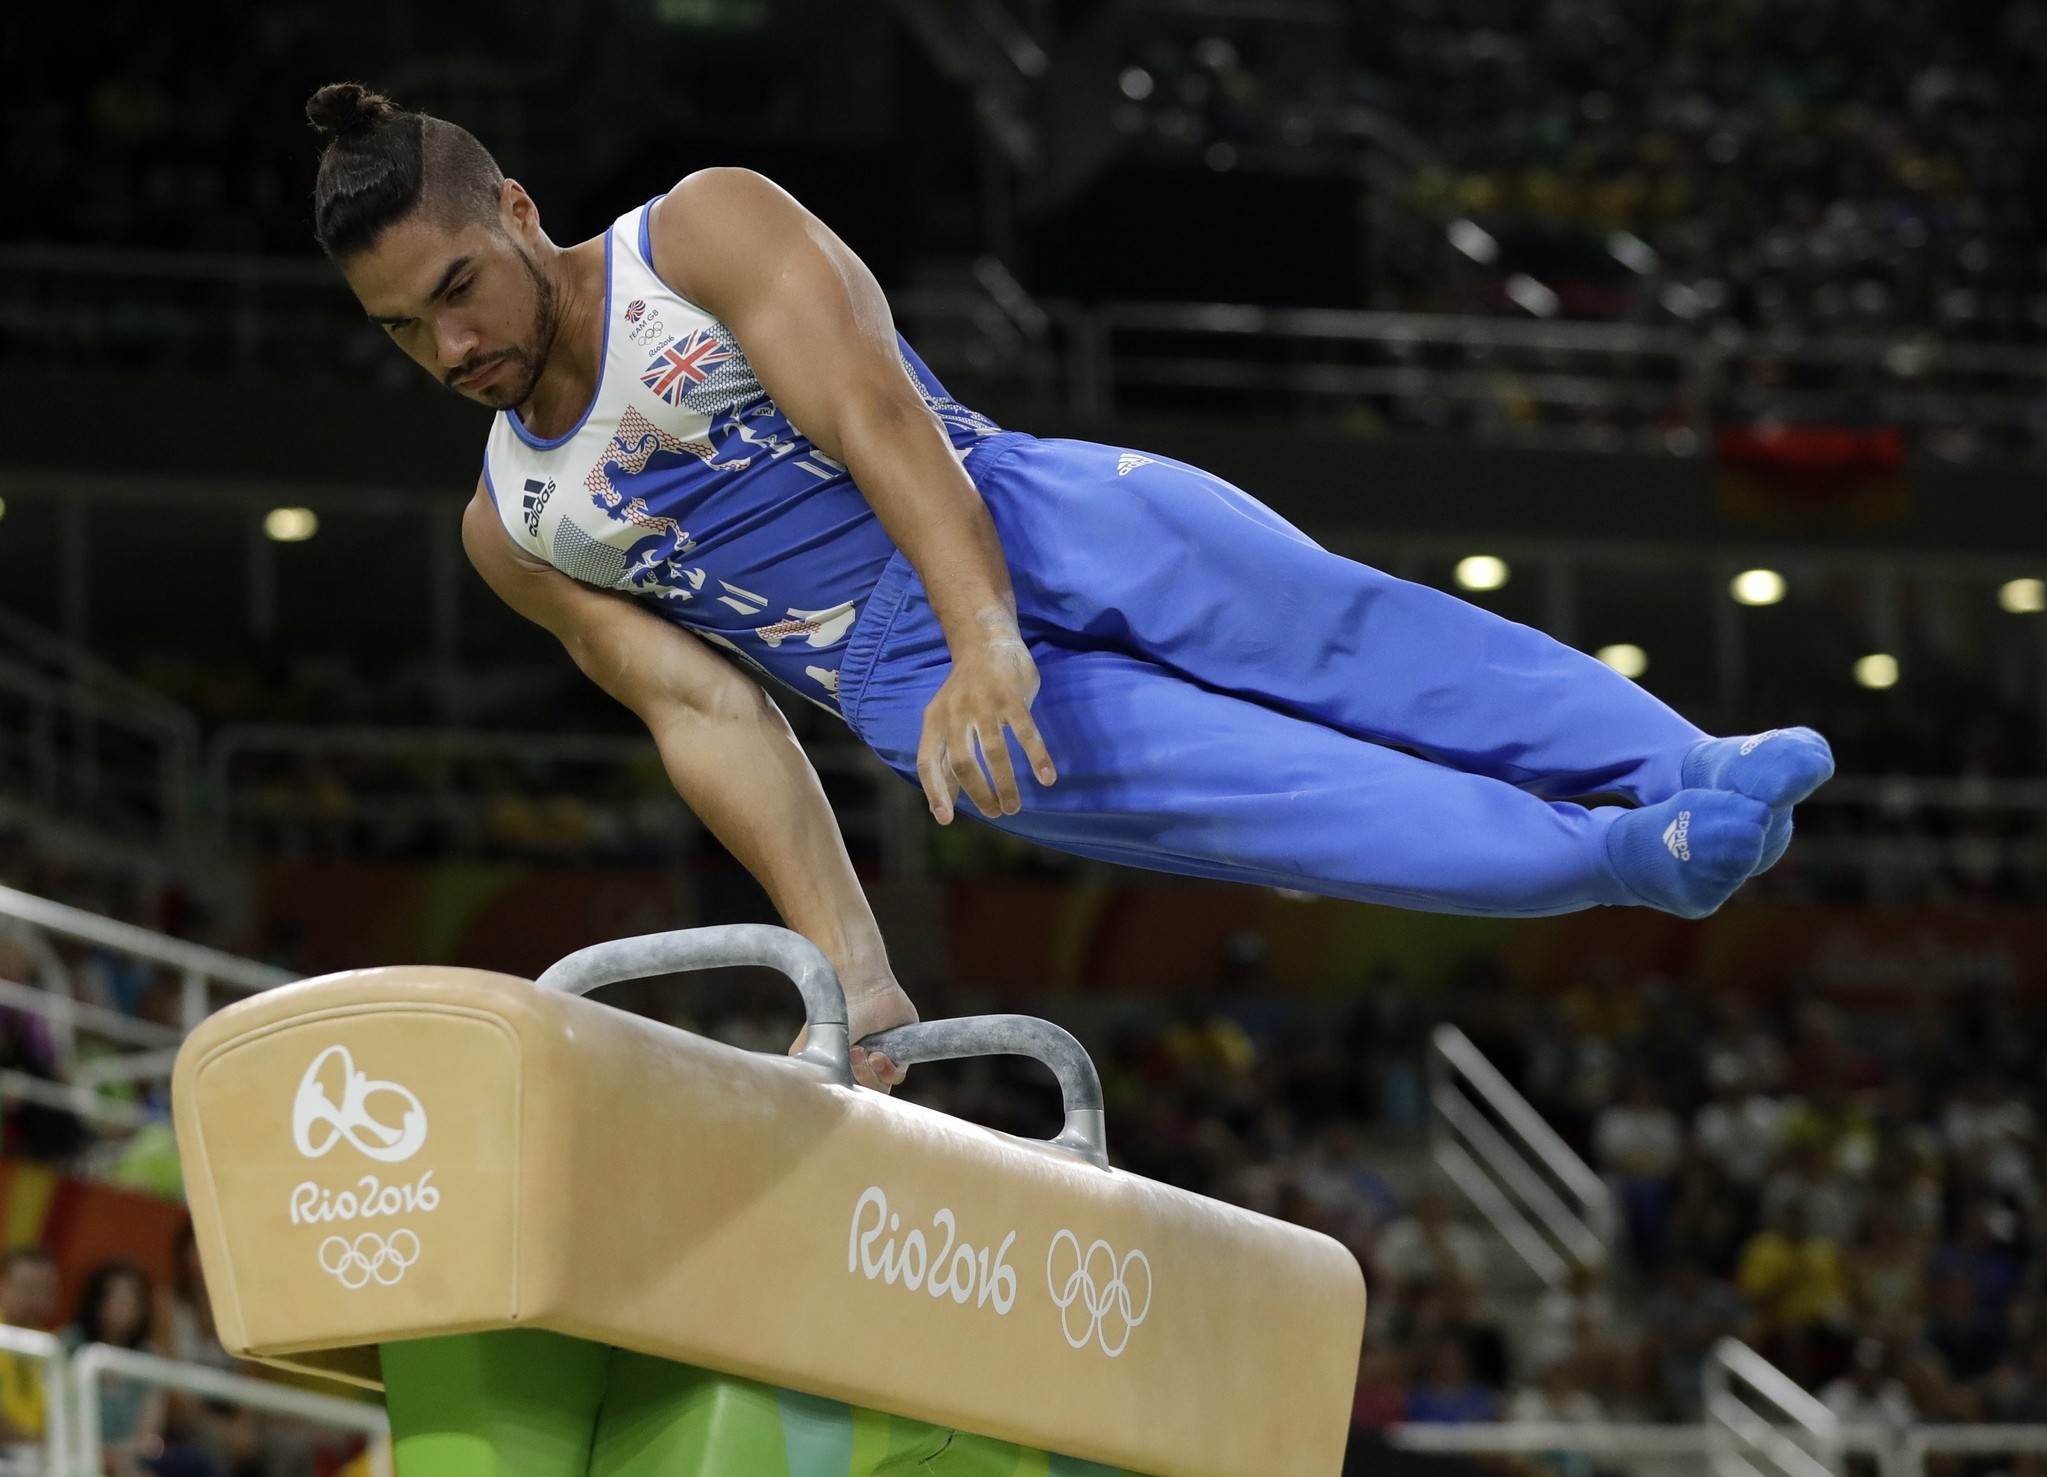 This is an Aug. 14, 2016 file photo of Britain's Louis Smith as he performs on the pommel horse during the artistic gymnastics men's apparatus final at the 2016 Olympics in Rio de Janeiro, Brazil. (AP Photo)